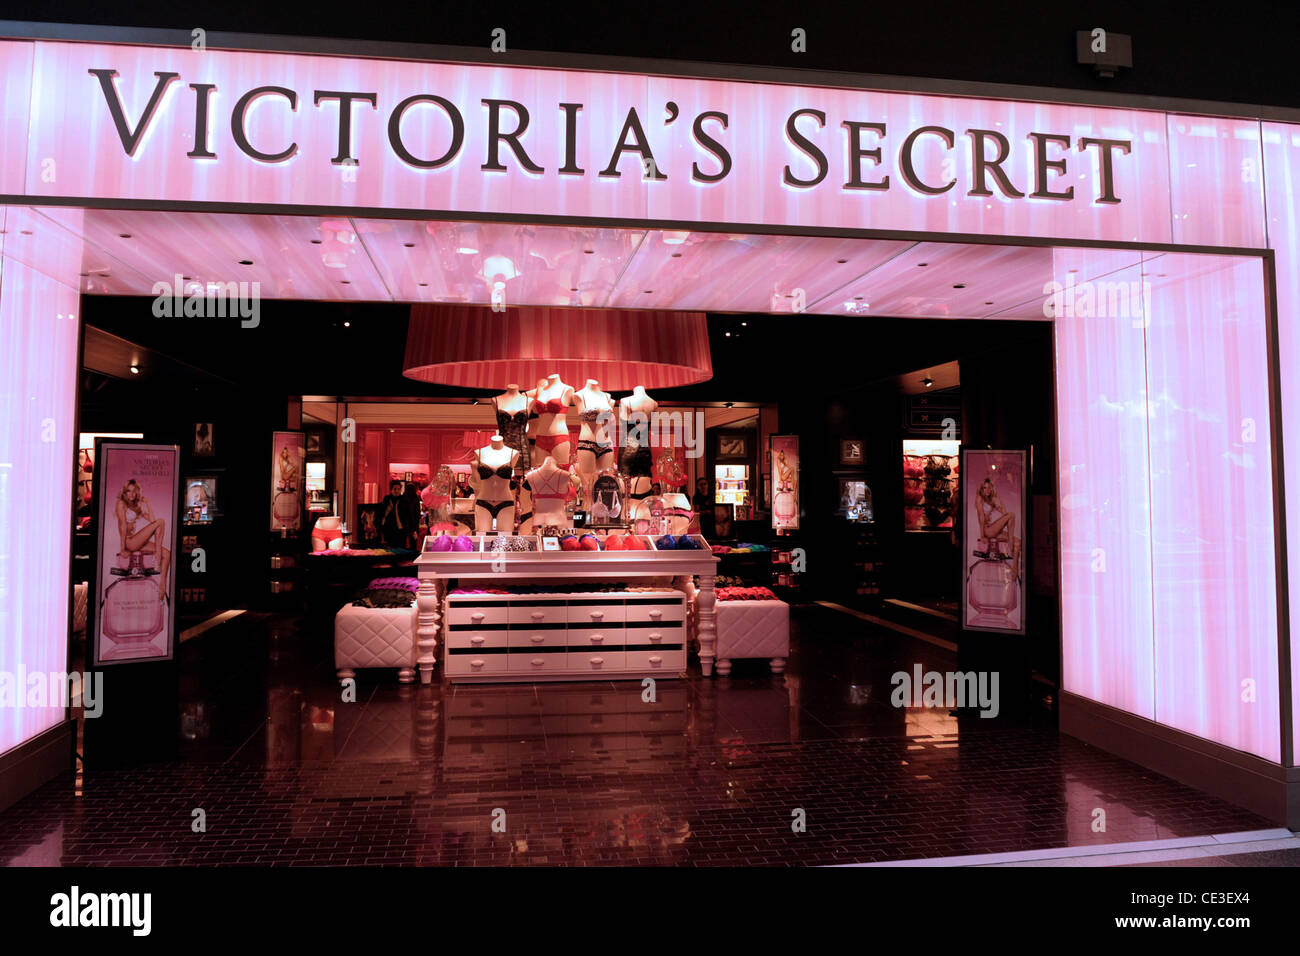 Atmosphere grand opening of Victoria's Secret new store in the